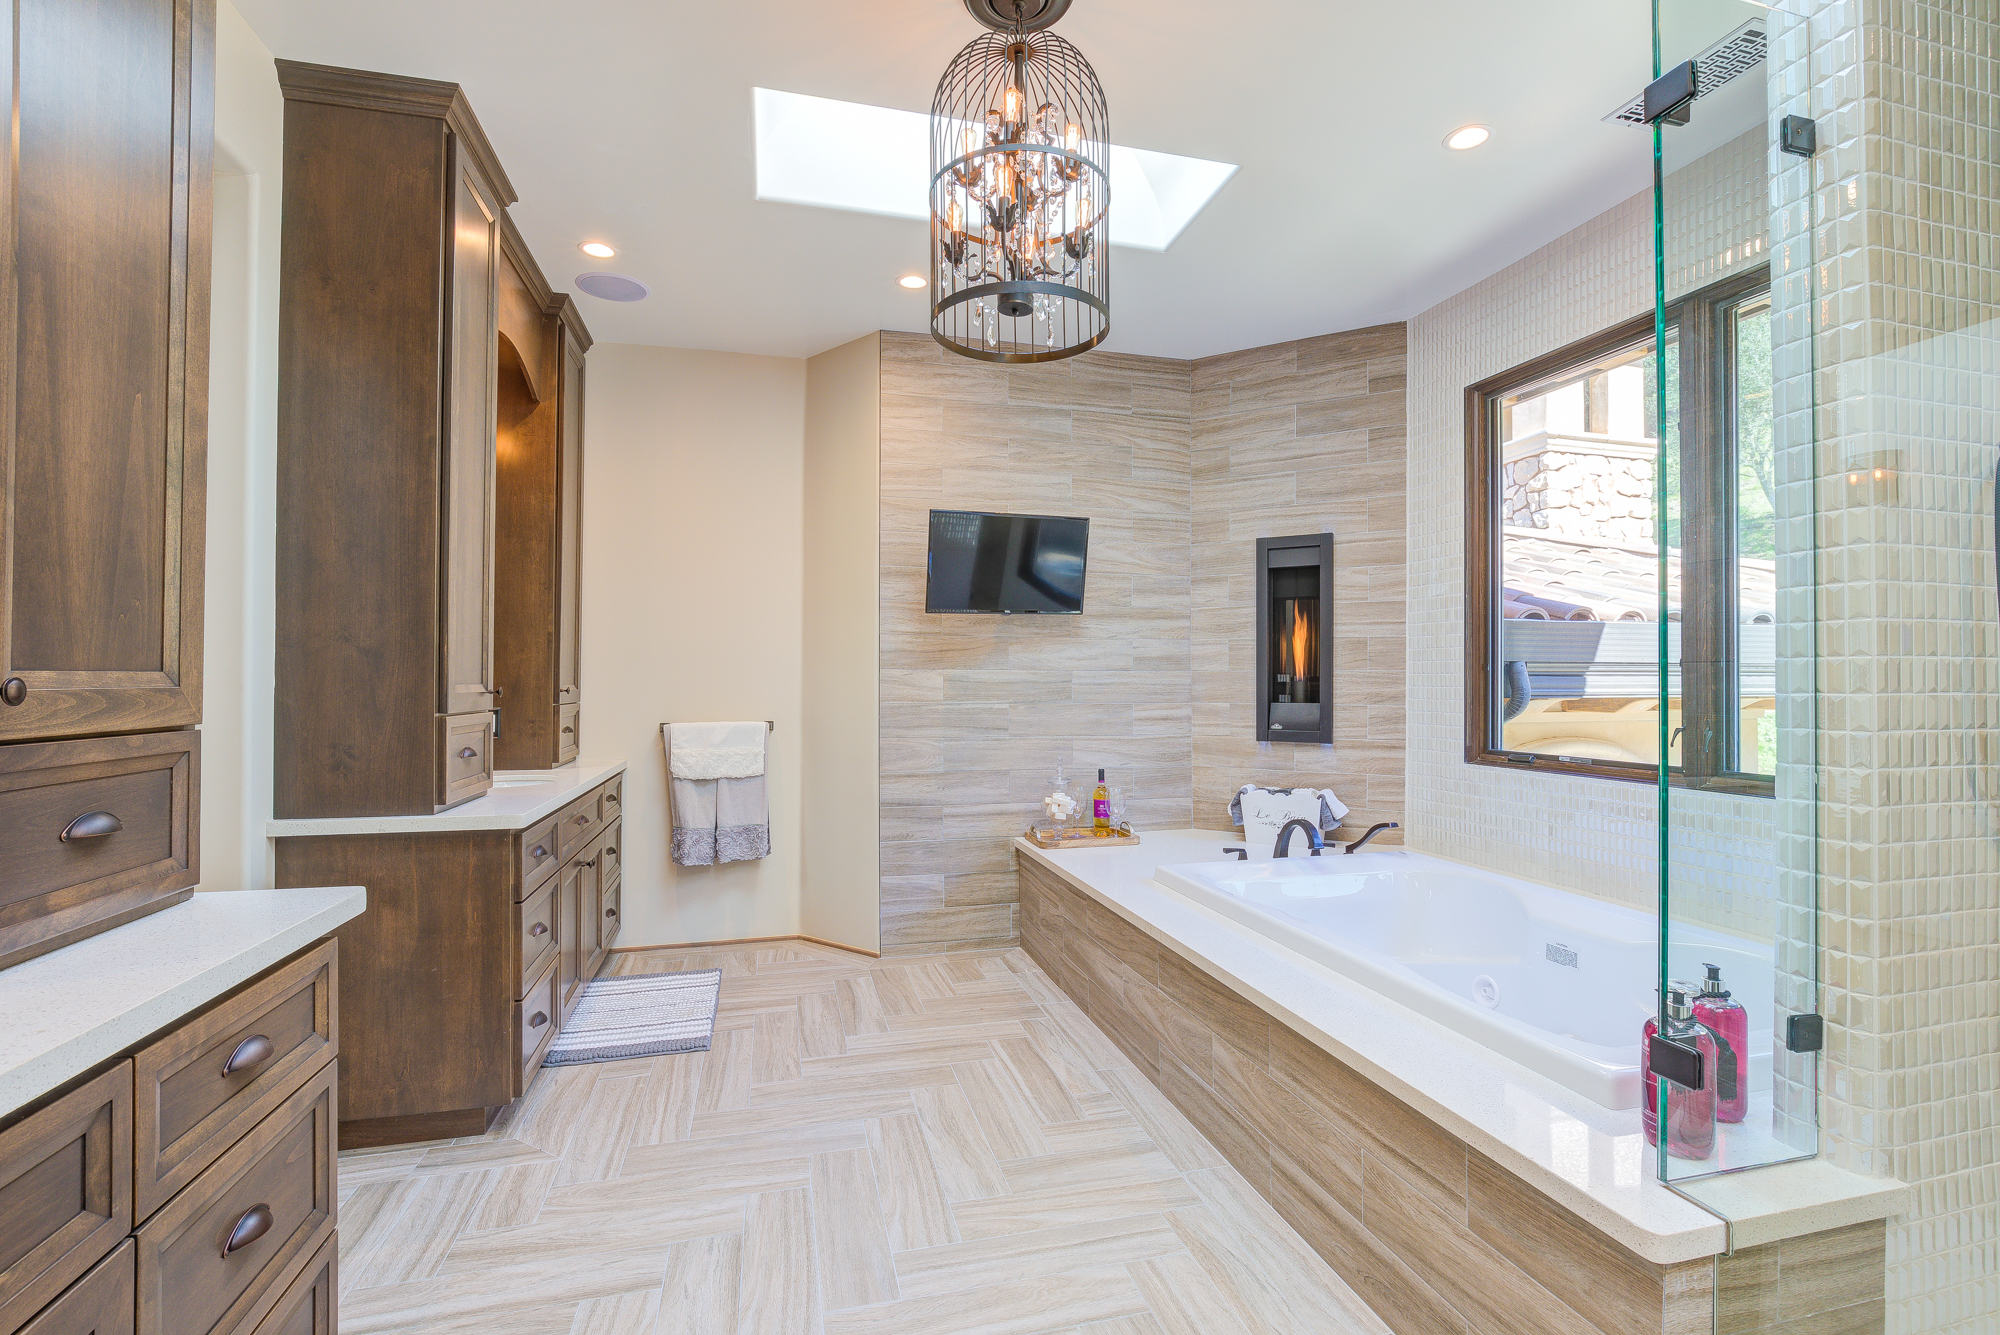  Italian porcelain tile forms a pristine herringbone pattern on the master bathroom floor and on the master shower walls.&nbsp;Richly appointed plumbing fixtures and a vintage birdcage crystal chandelier elevate this master bathroom to the likes of a